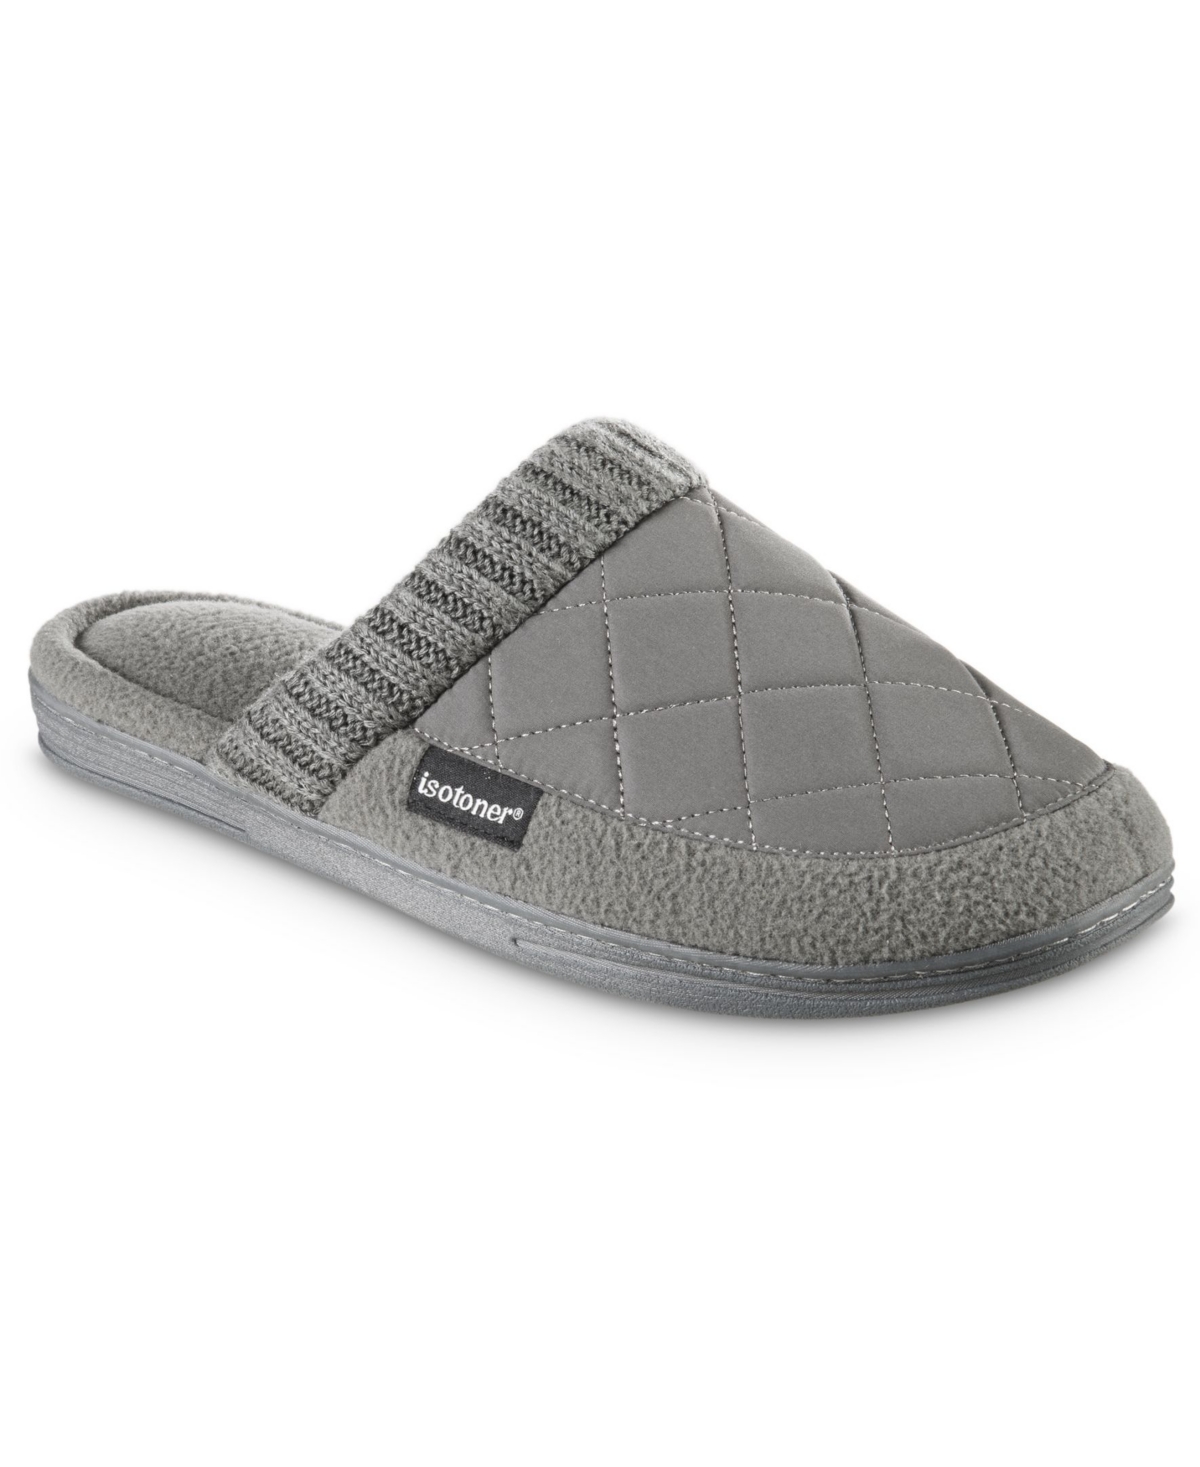 Isotoner Men's Memory Foam Quilted Levon Clog Slippers